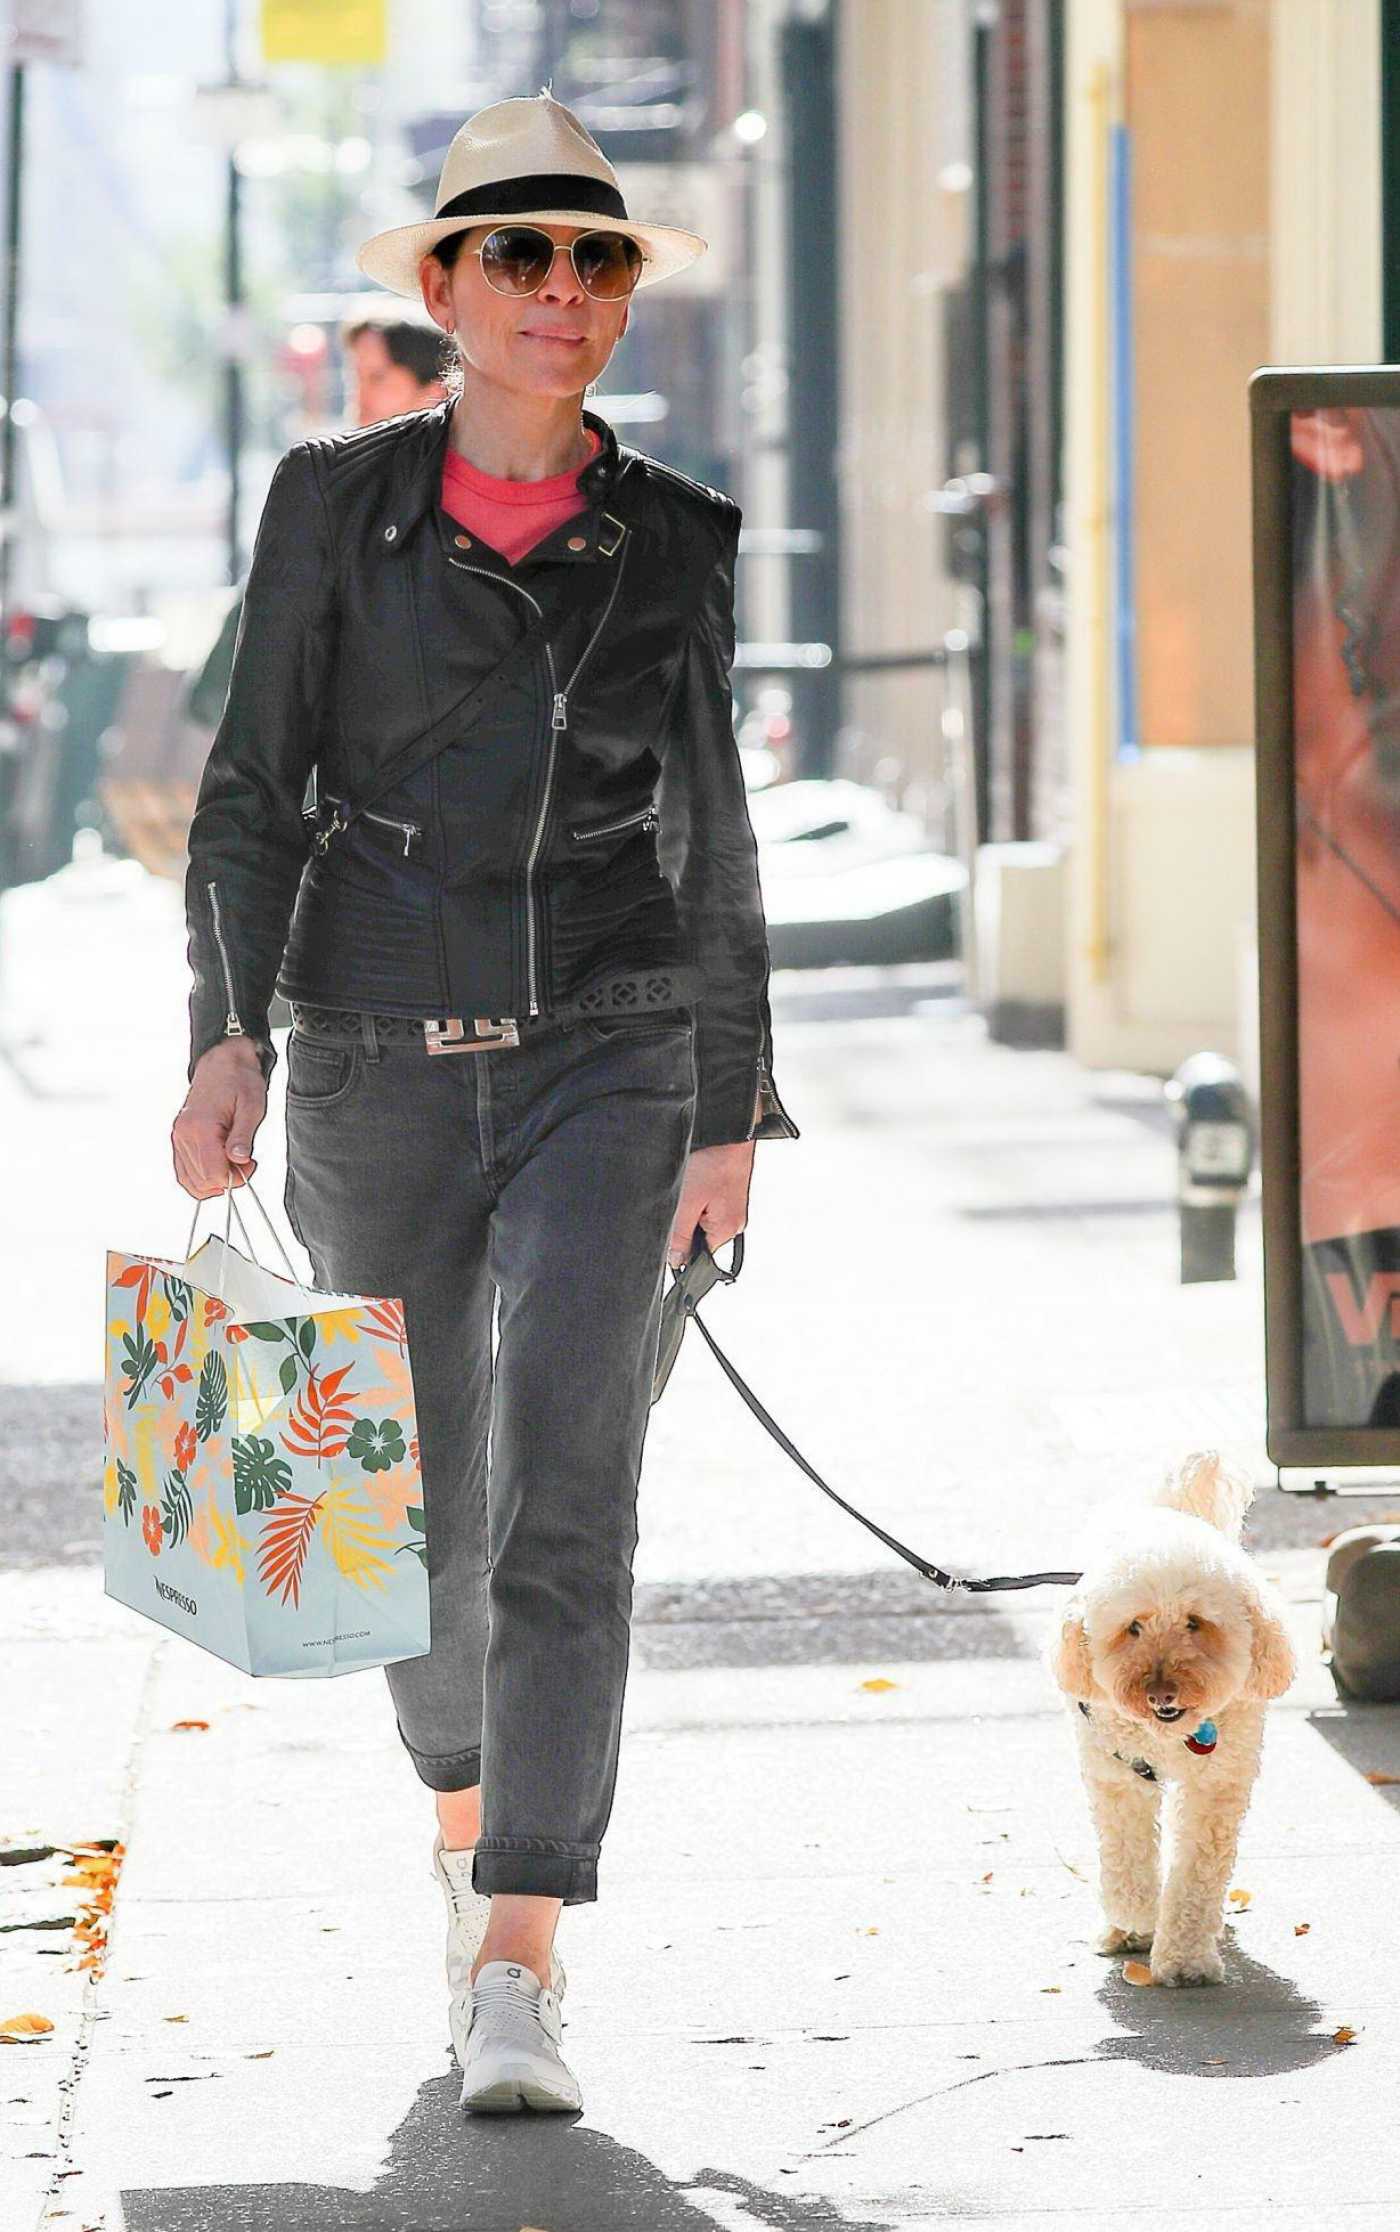 Julianna Margulies in a Black Leather Jacket Walks Her Dog in New York City 11/04/2022